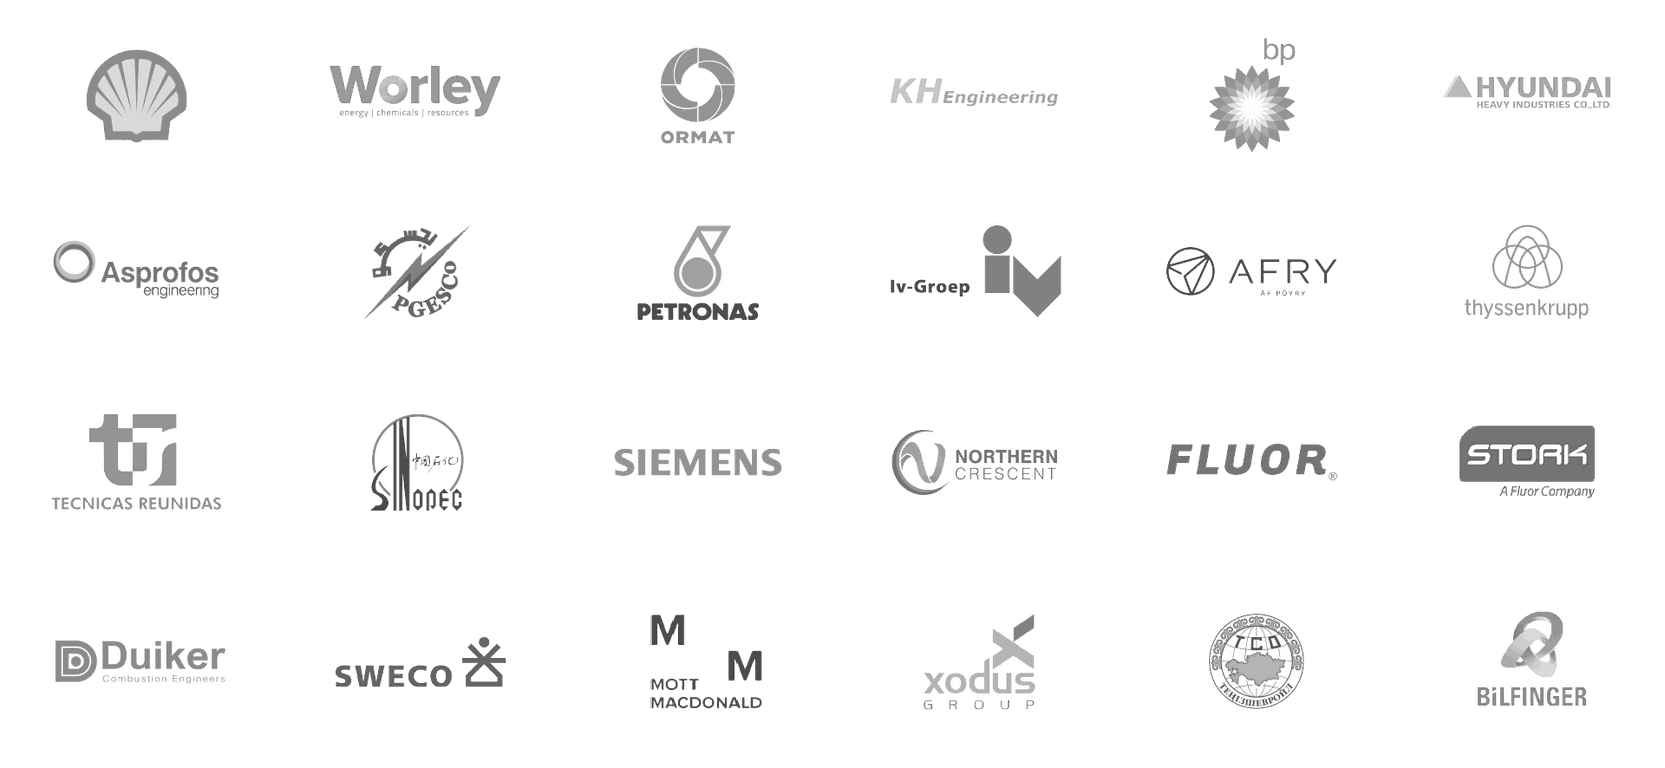 The logos of our partners.